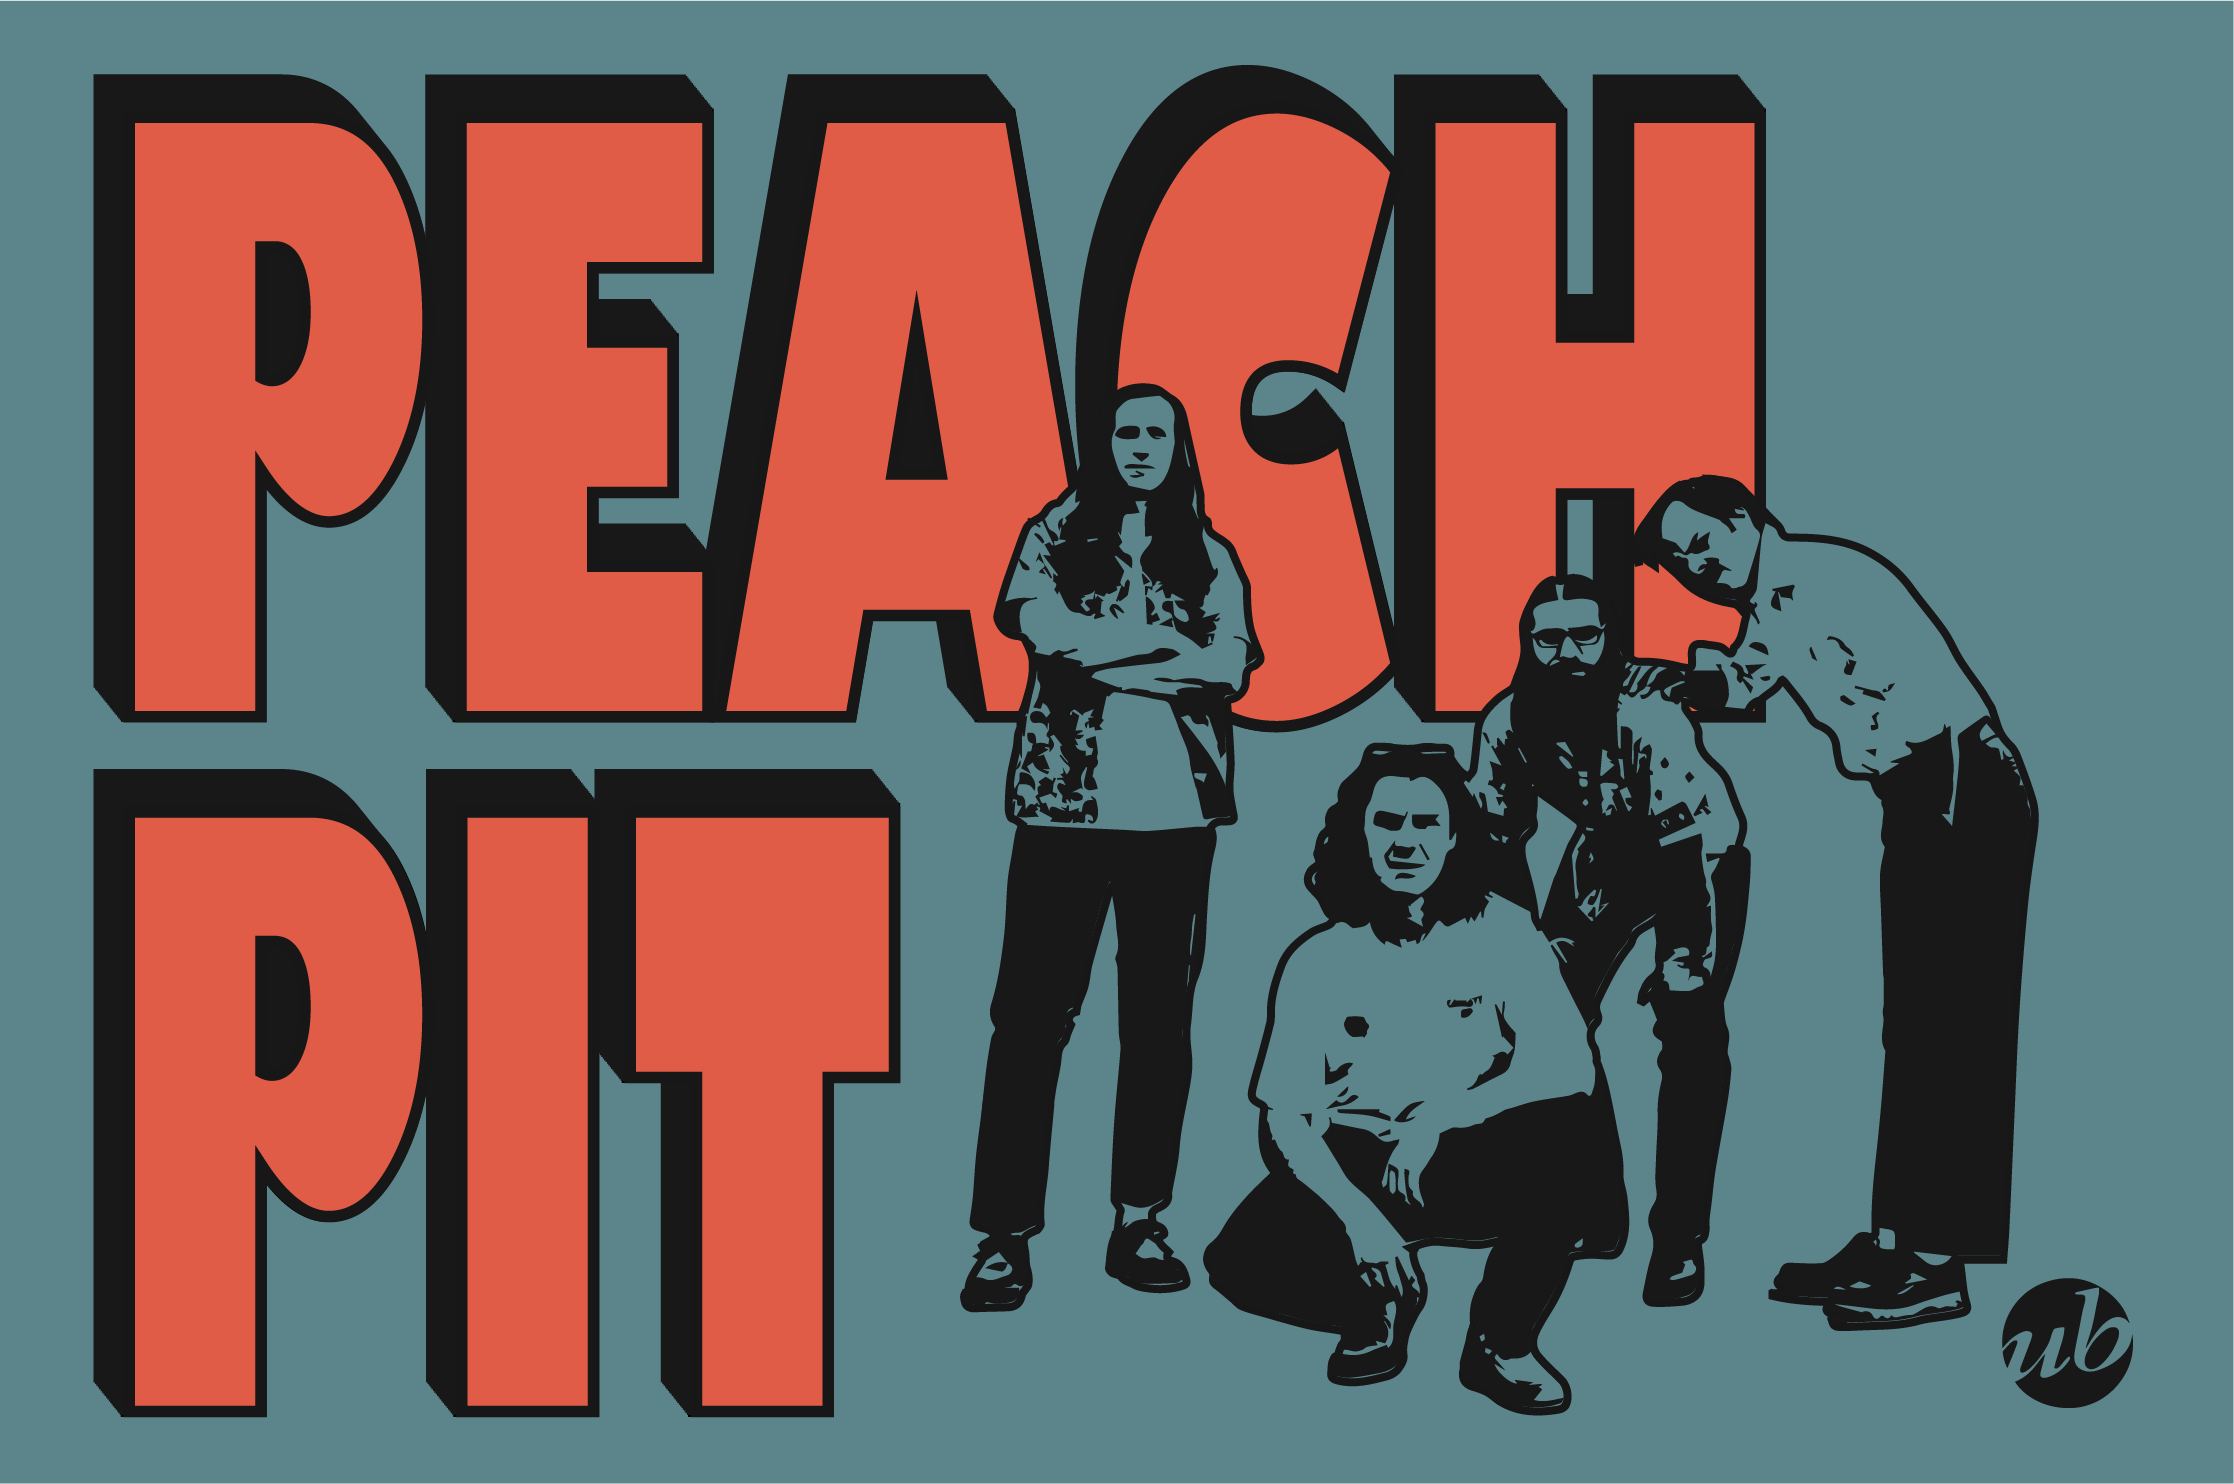 More Info for Peach Pit